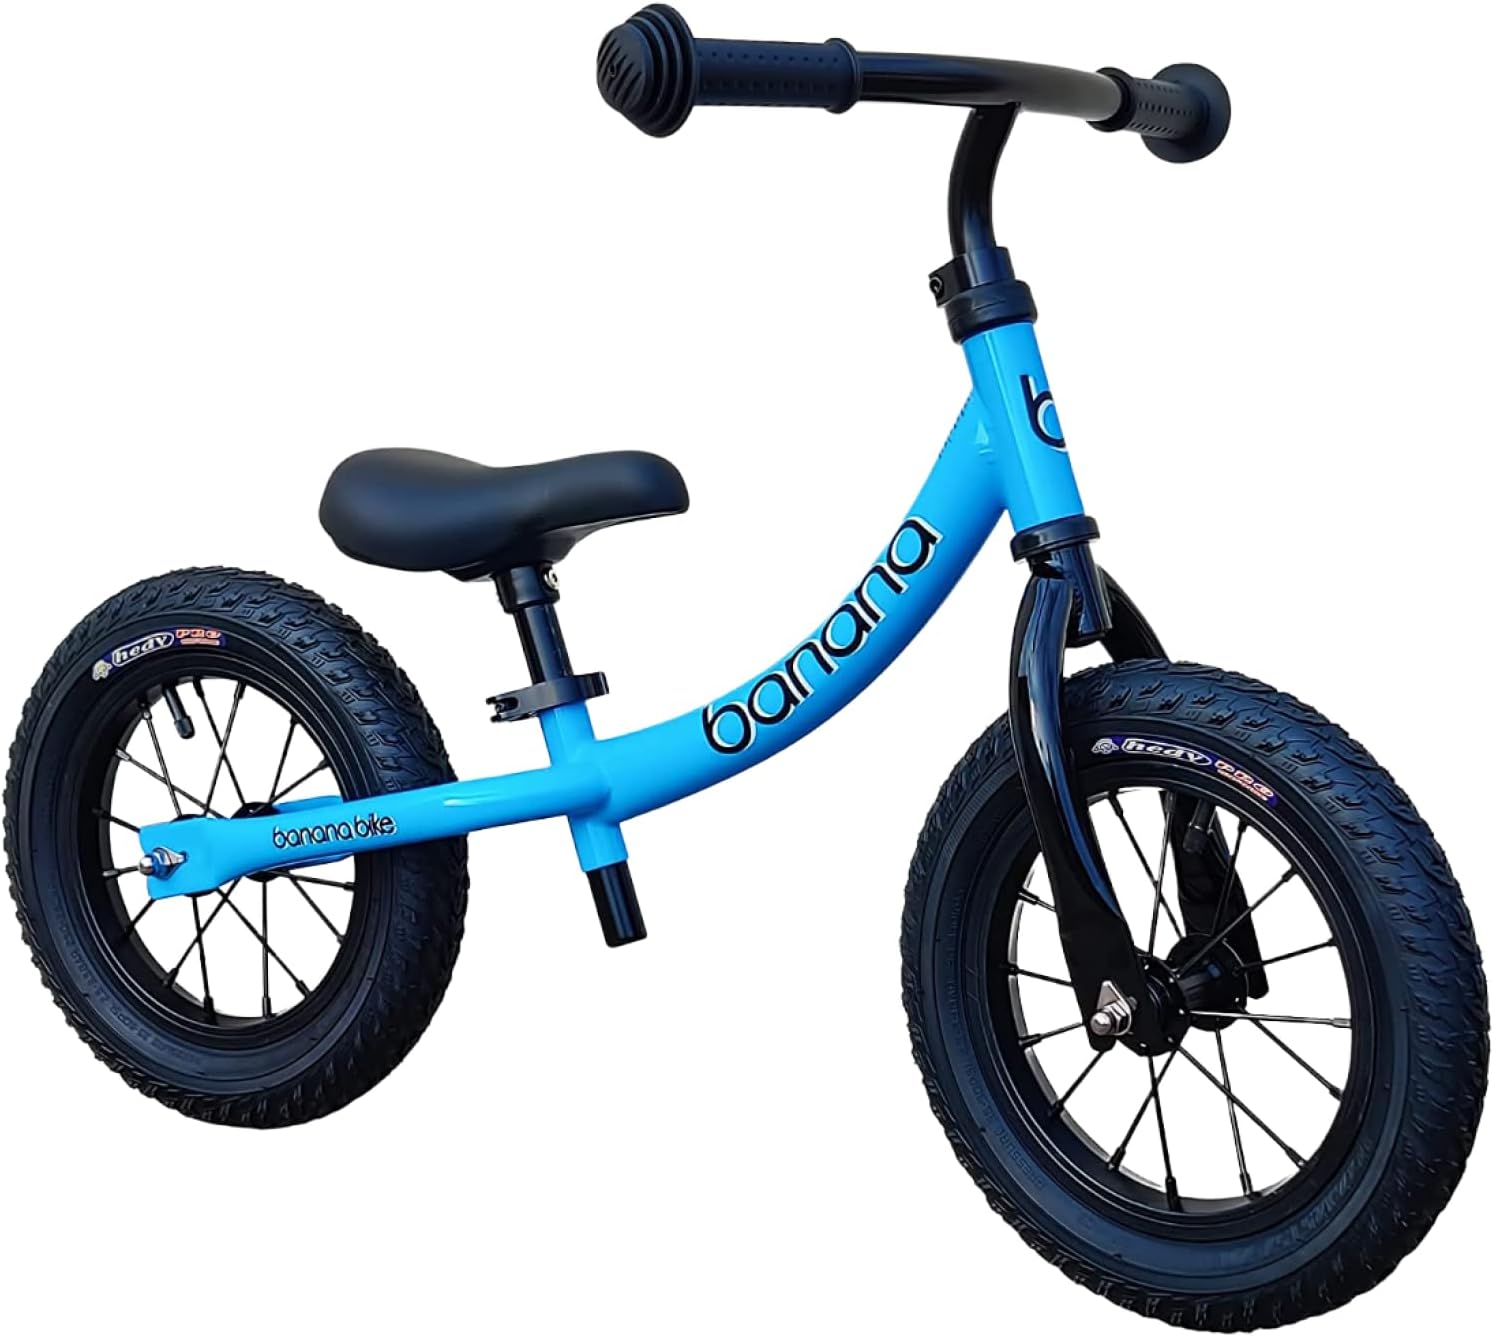 Banana LT Balance Bike - Lightweight Toddler Bike for 2, 3, 4, and 5 Year Old Boys and Girls - No Pedal Bikes for Kids with Adjustable Handlebar and seat - Aluminium, EVA Tires - Training Bike (Blue) - image 1 of 6